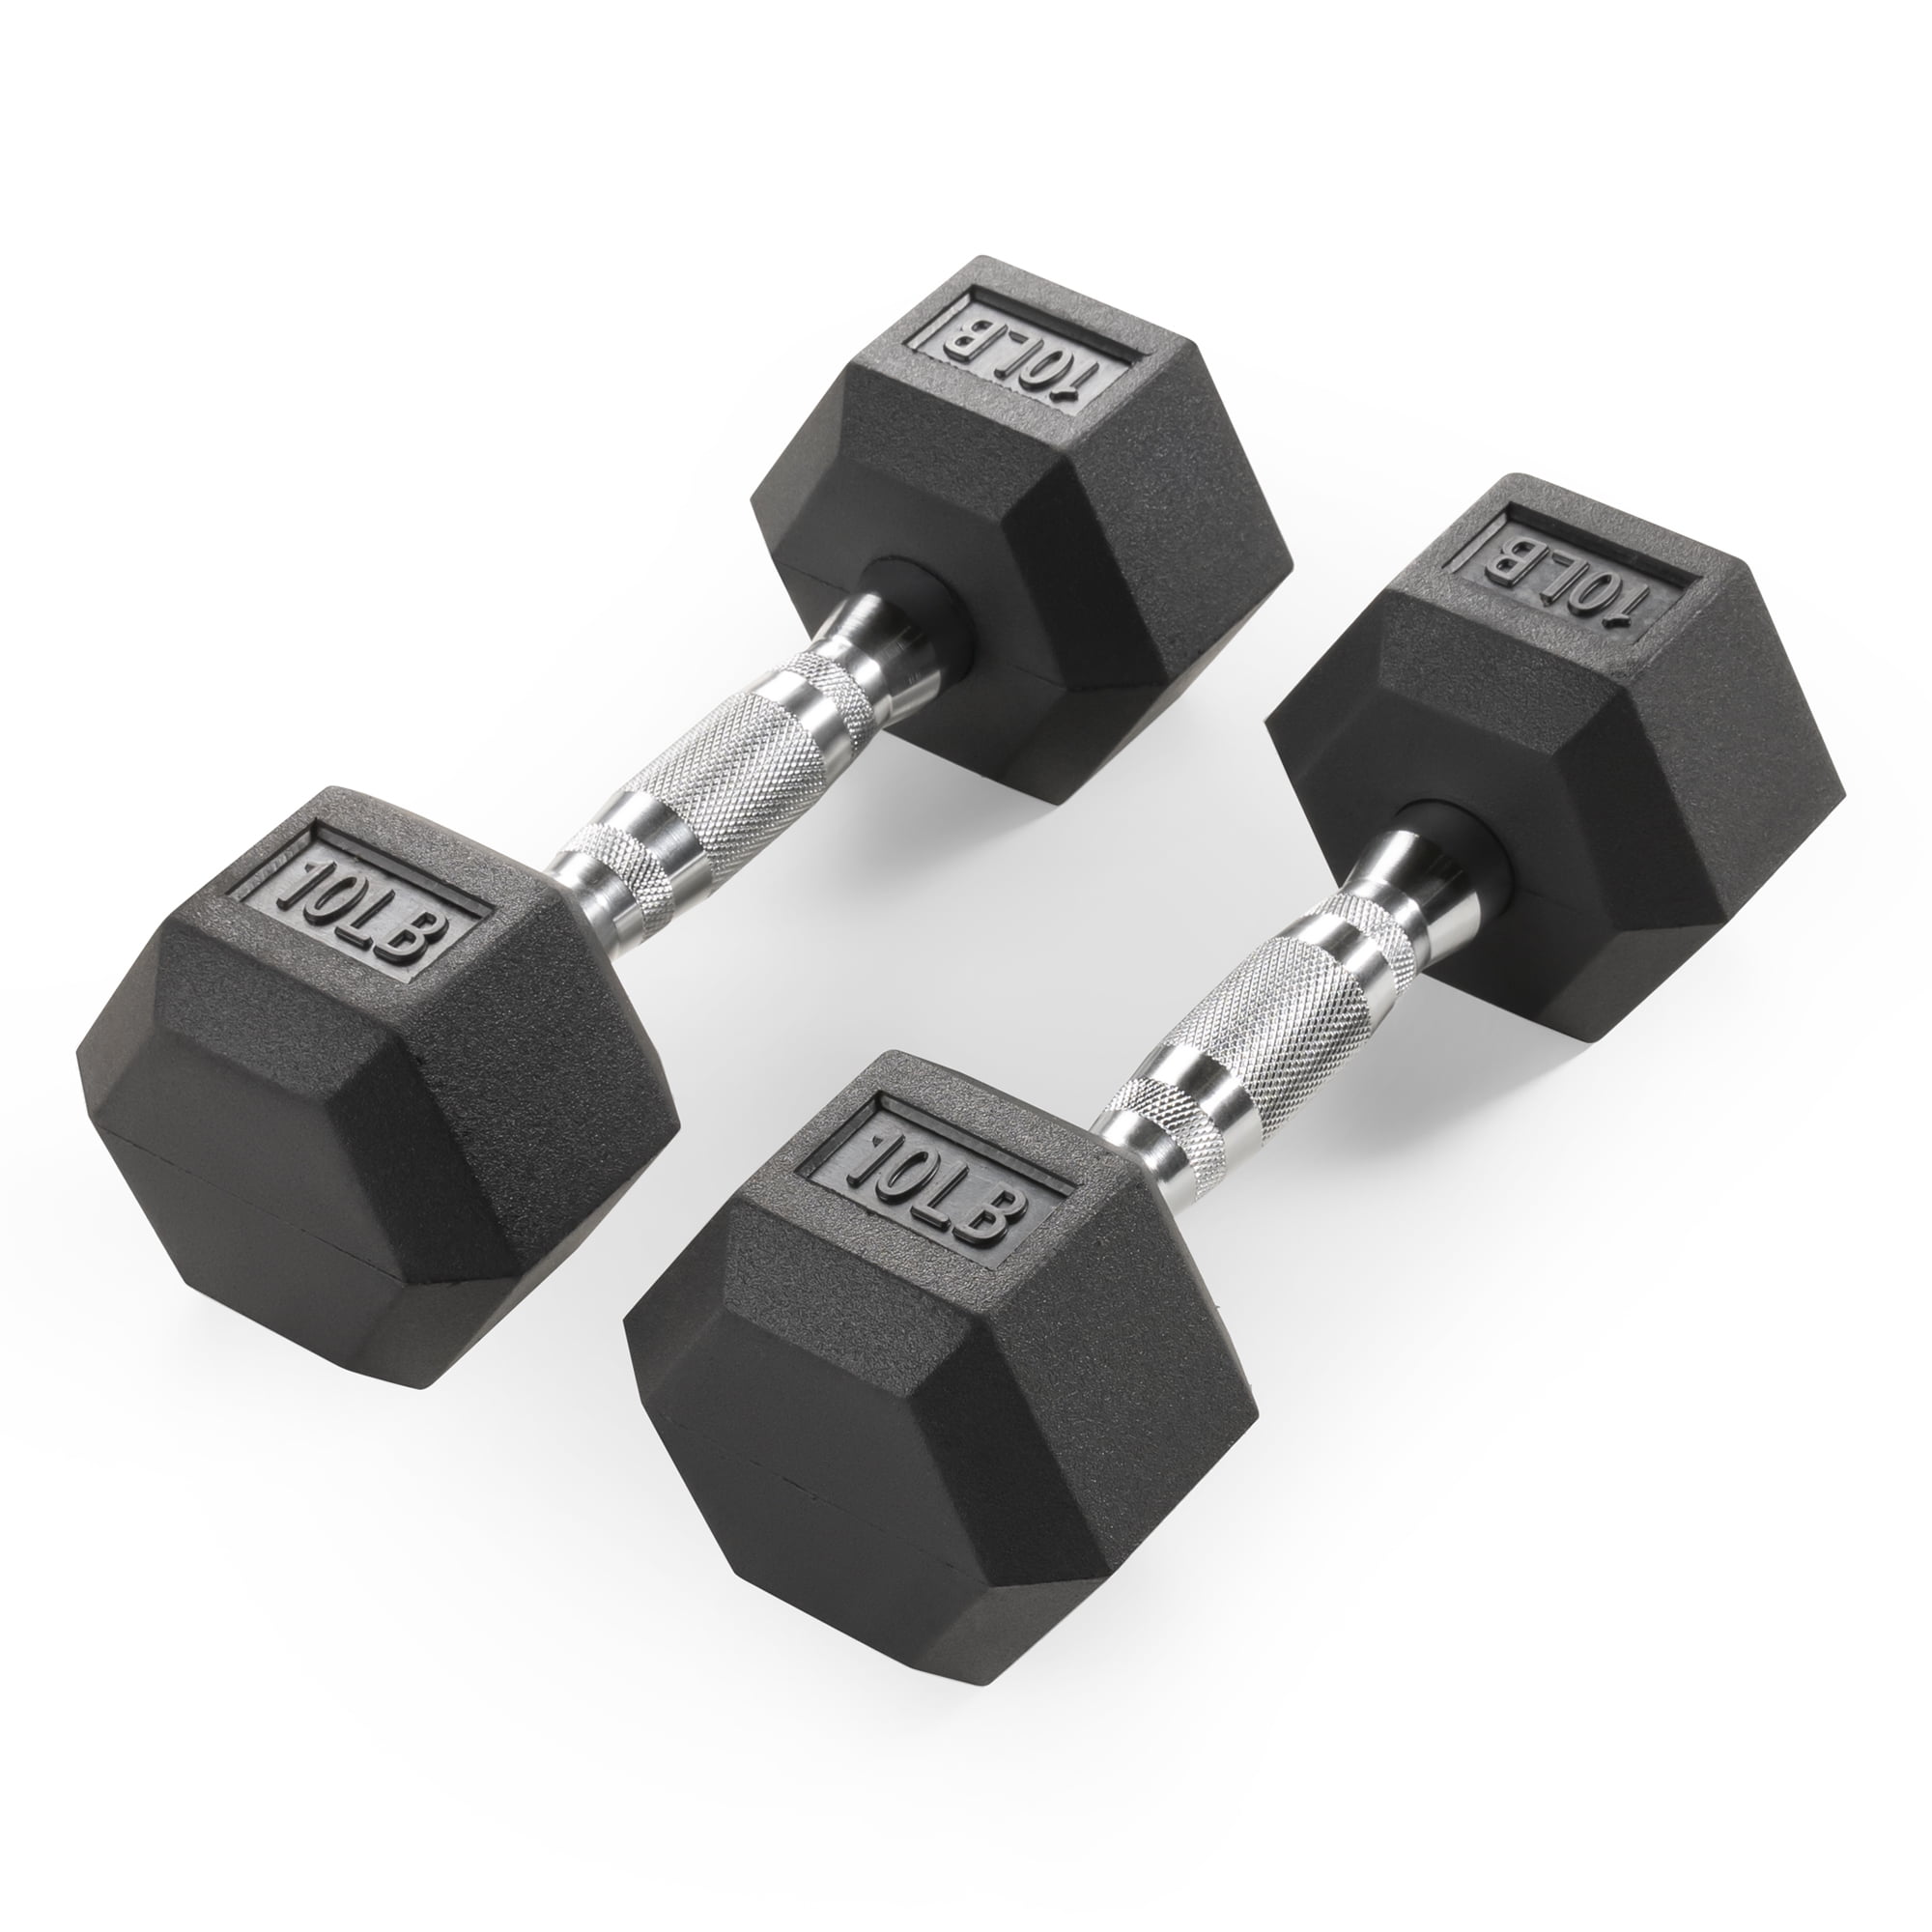 40 Lbs Total 20Lb Weider RubberHex Dumbbells Compare CAP Brand New Set Of 2 